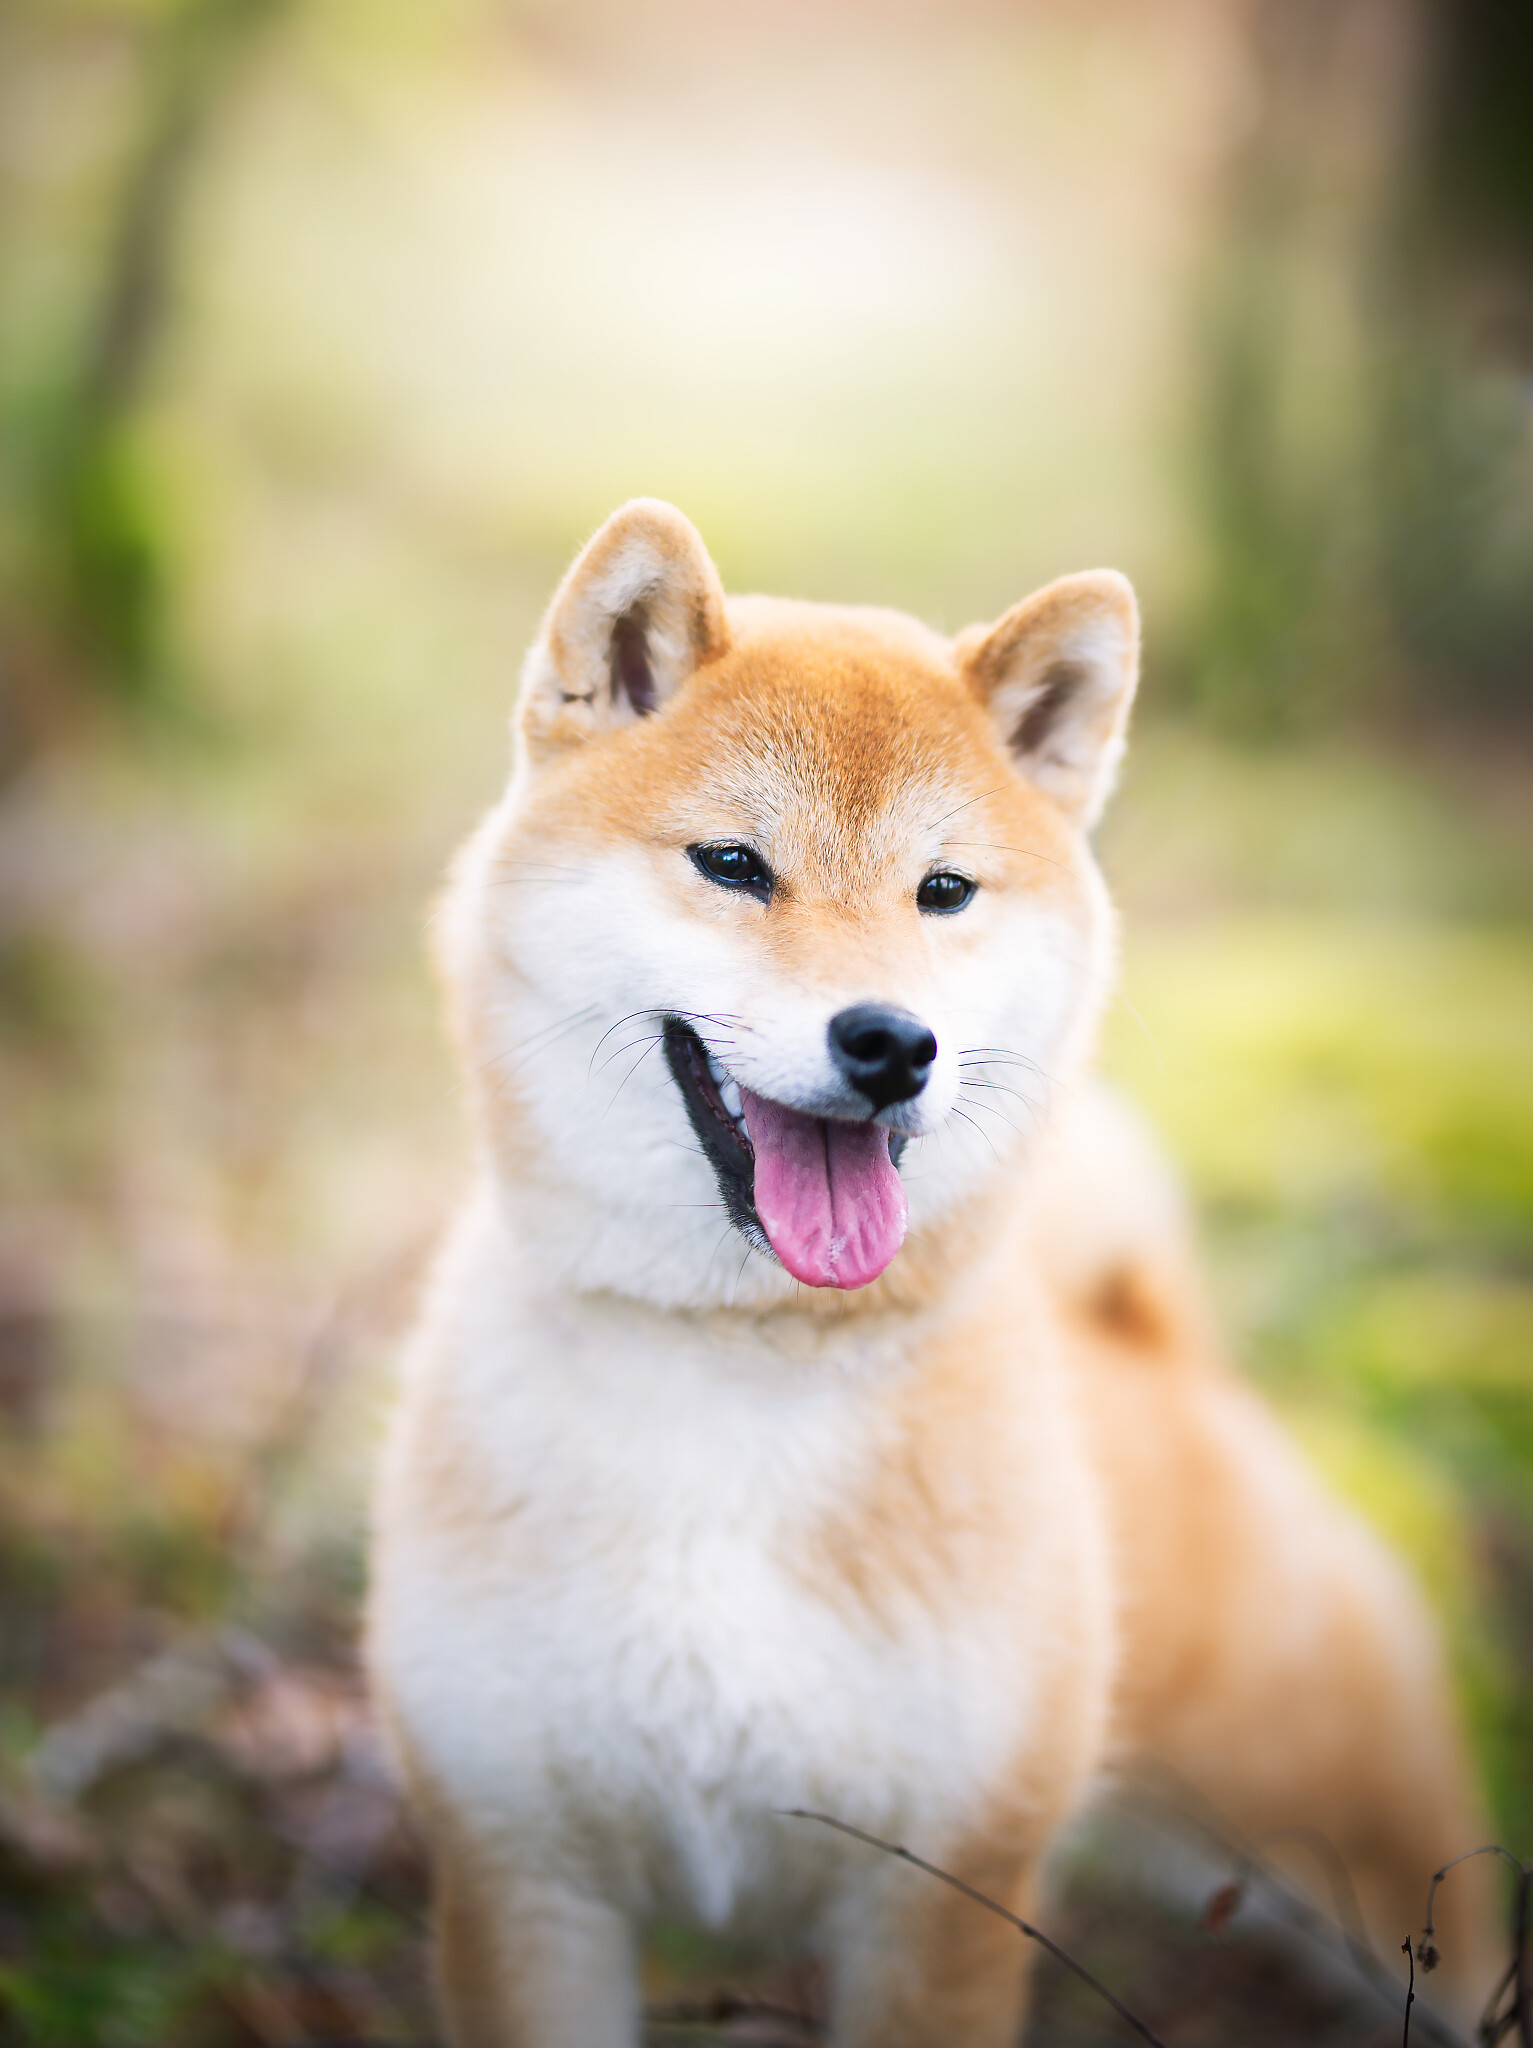 Shiba Inu: The breed can often be seen licking their paws and legs, much as cats do. 1540x2050 HD Wallpaper.